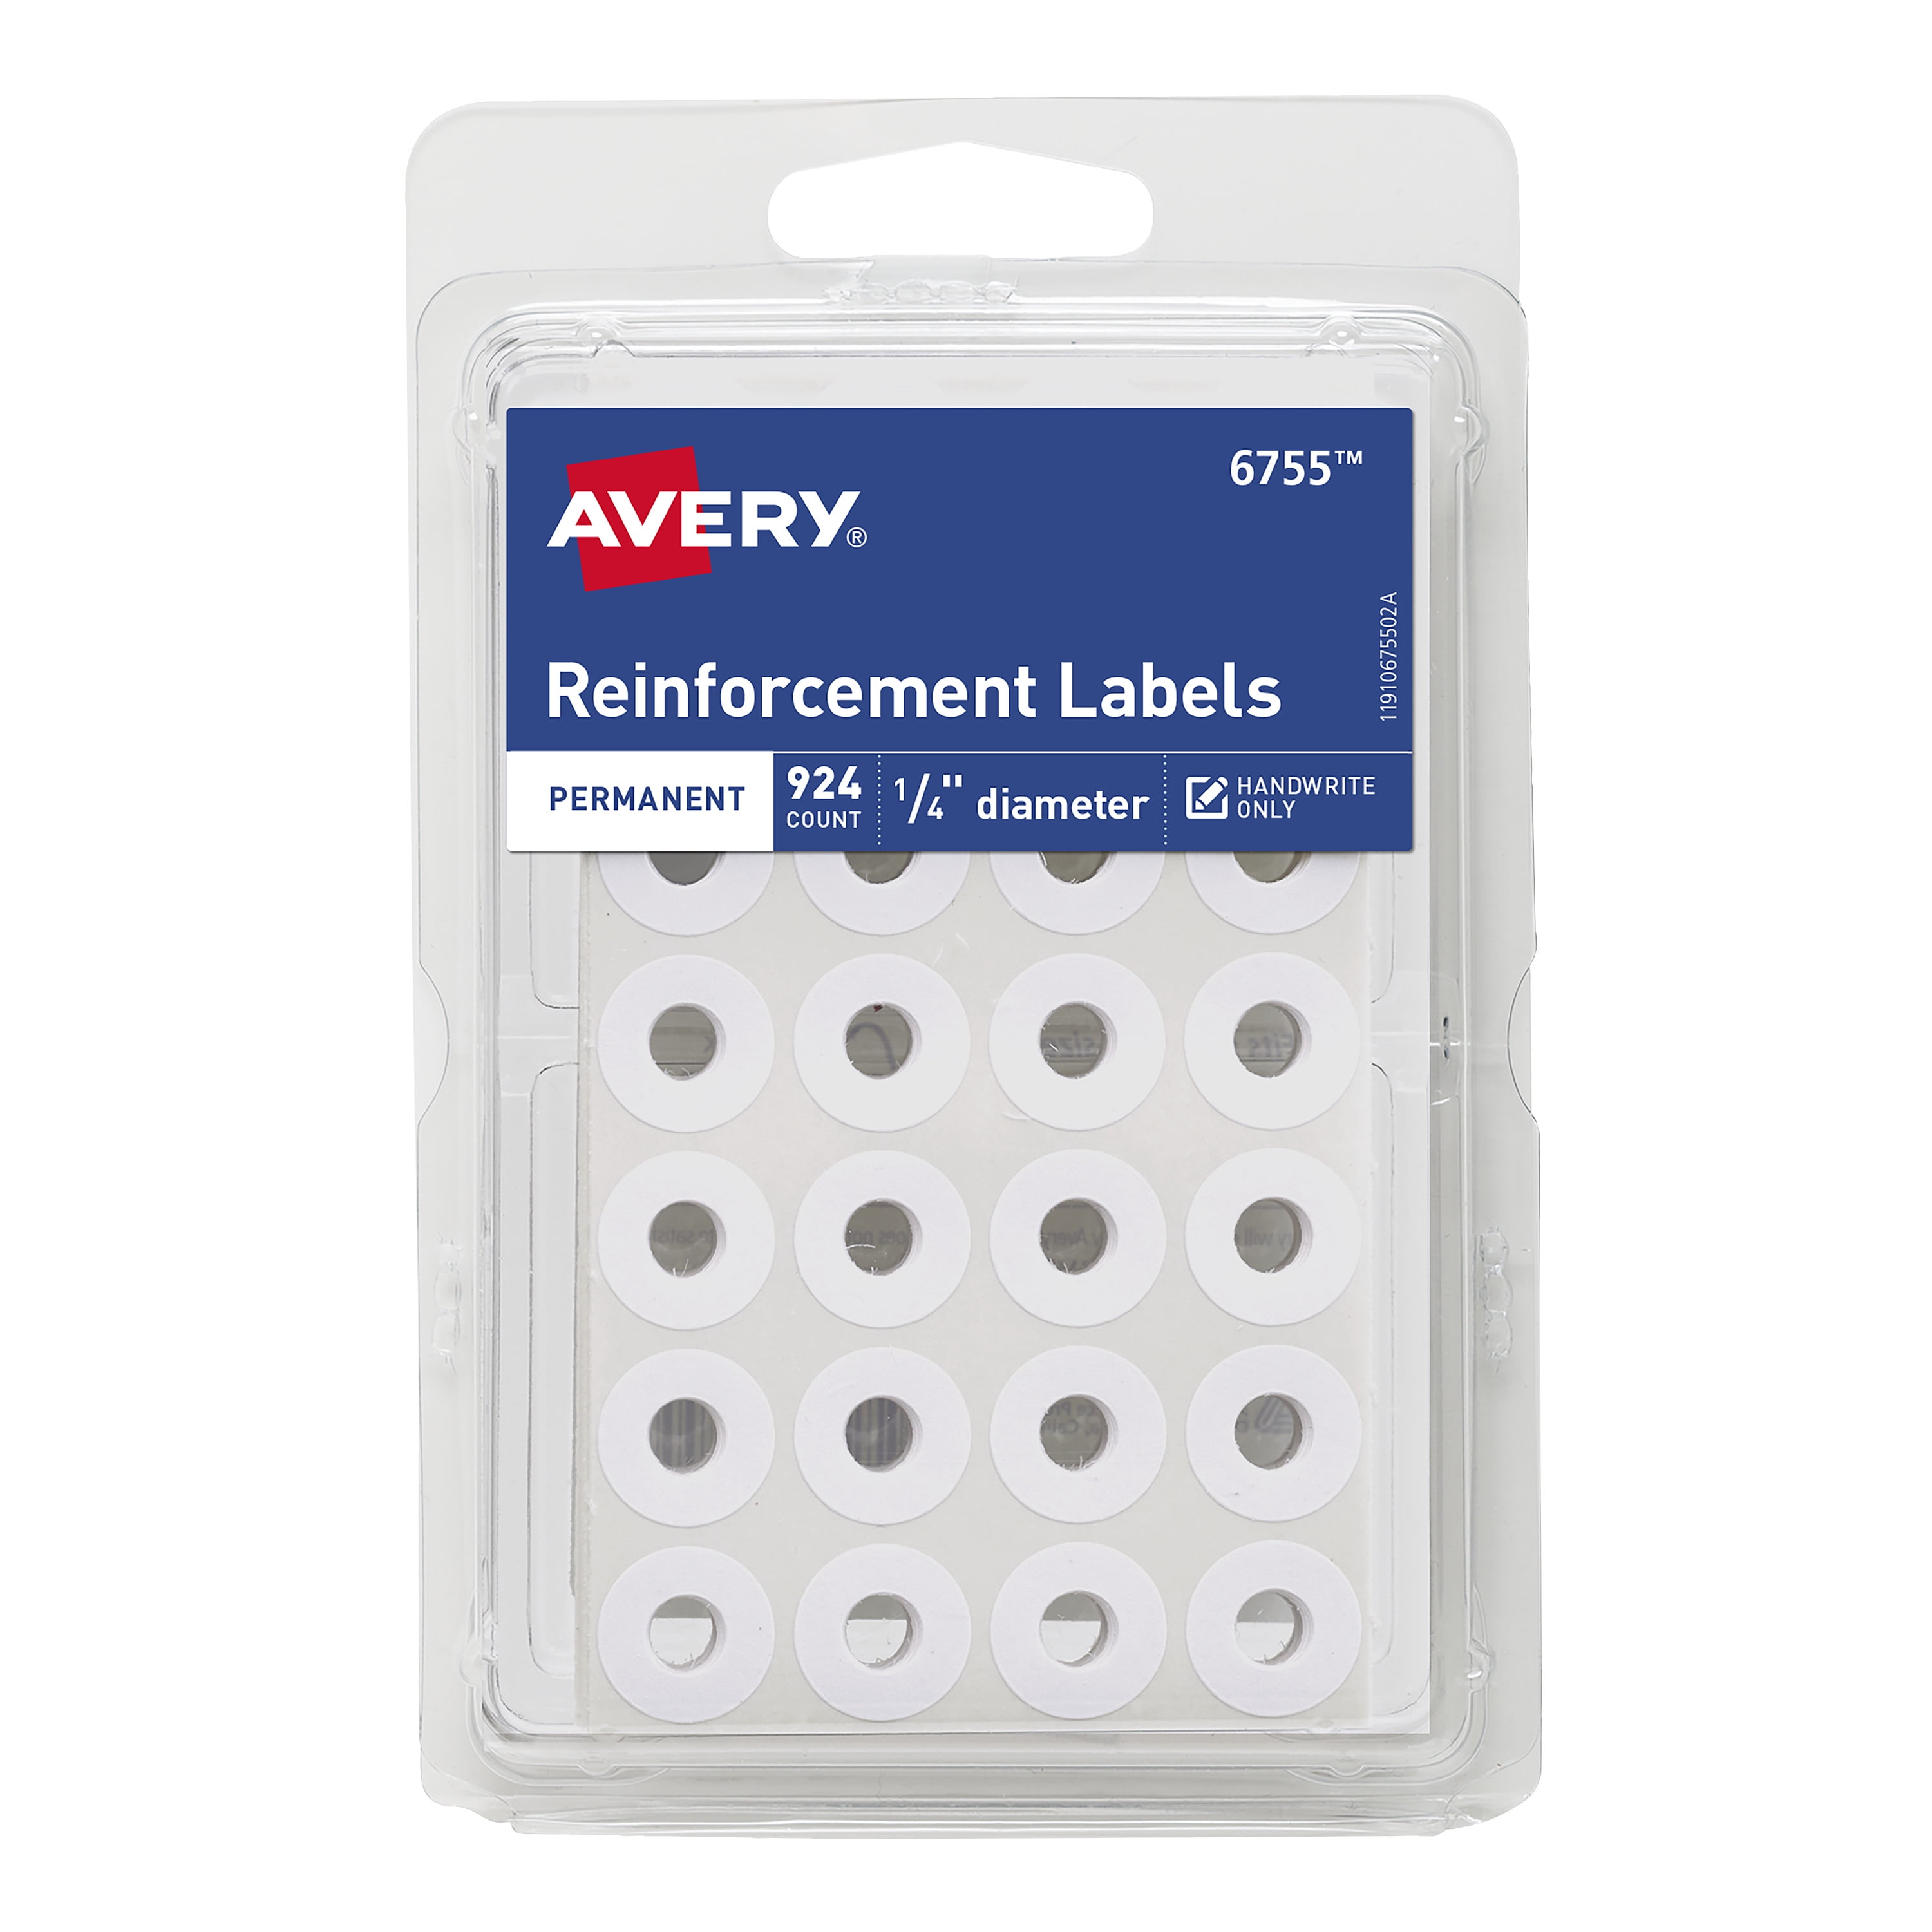 Avery Round Reinforcement Labels, White, 1/4, Permanent, 924